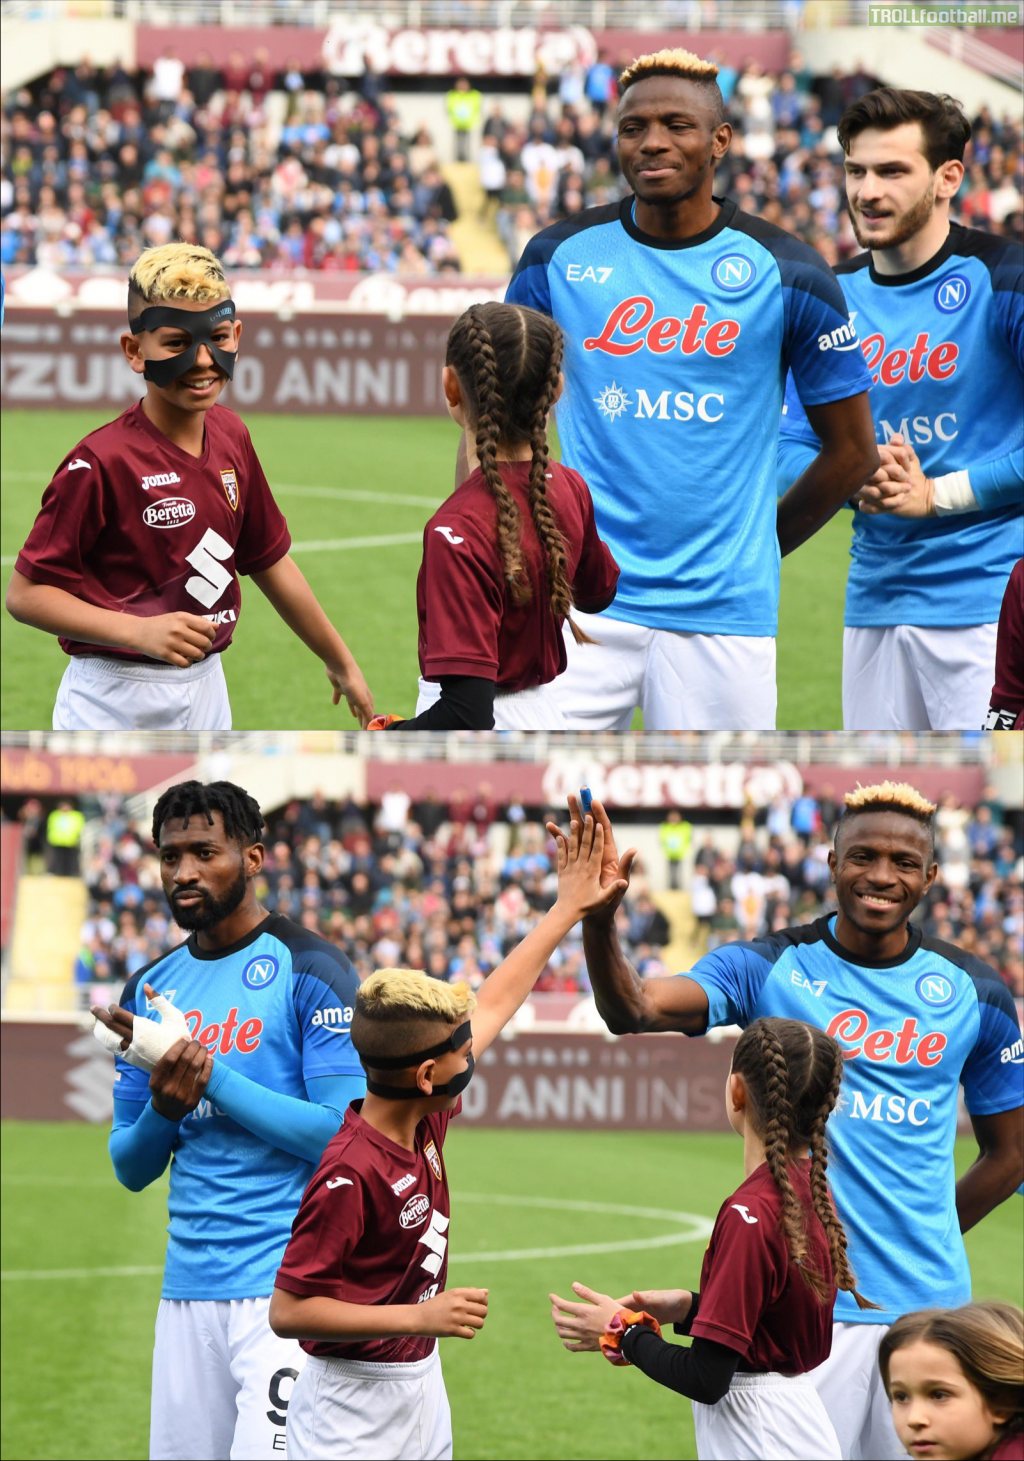 Torino kid happy to meet his clearly favorite player